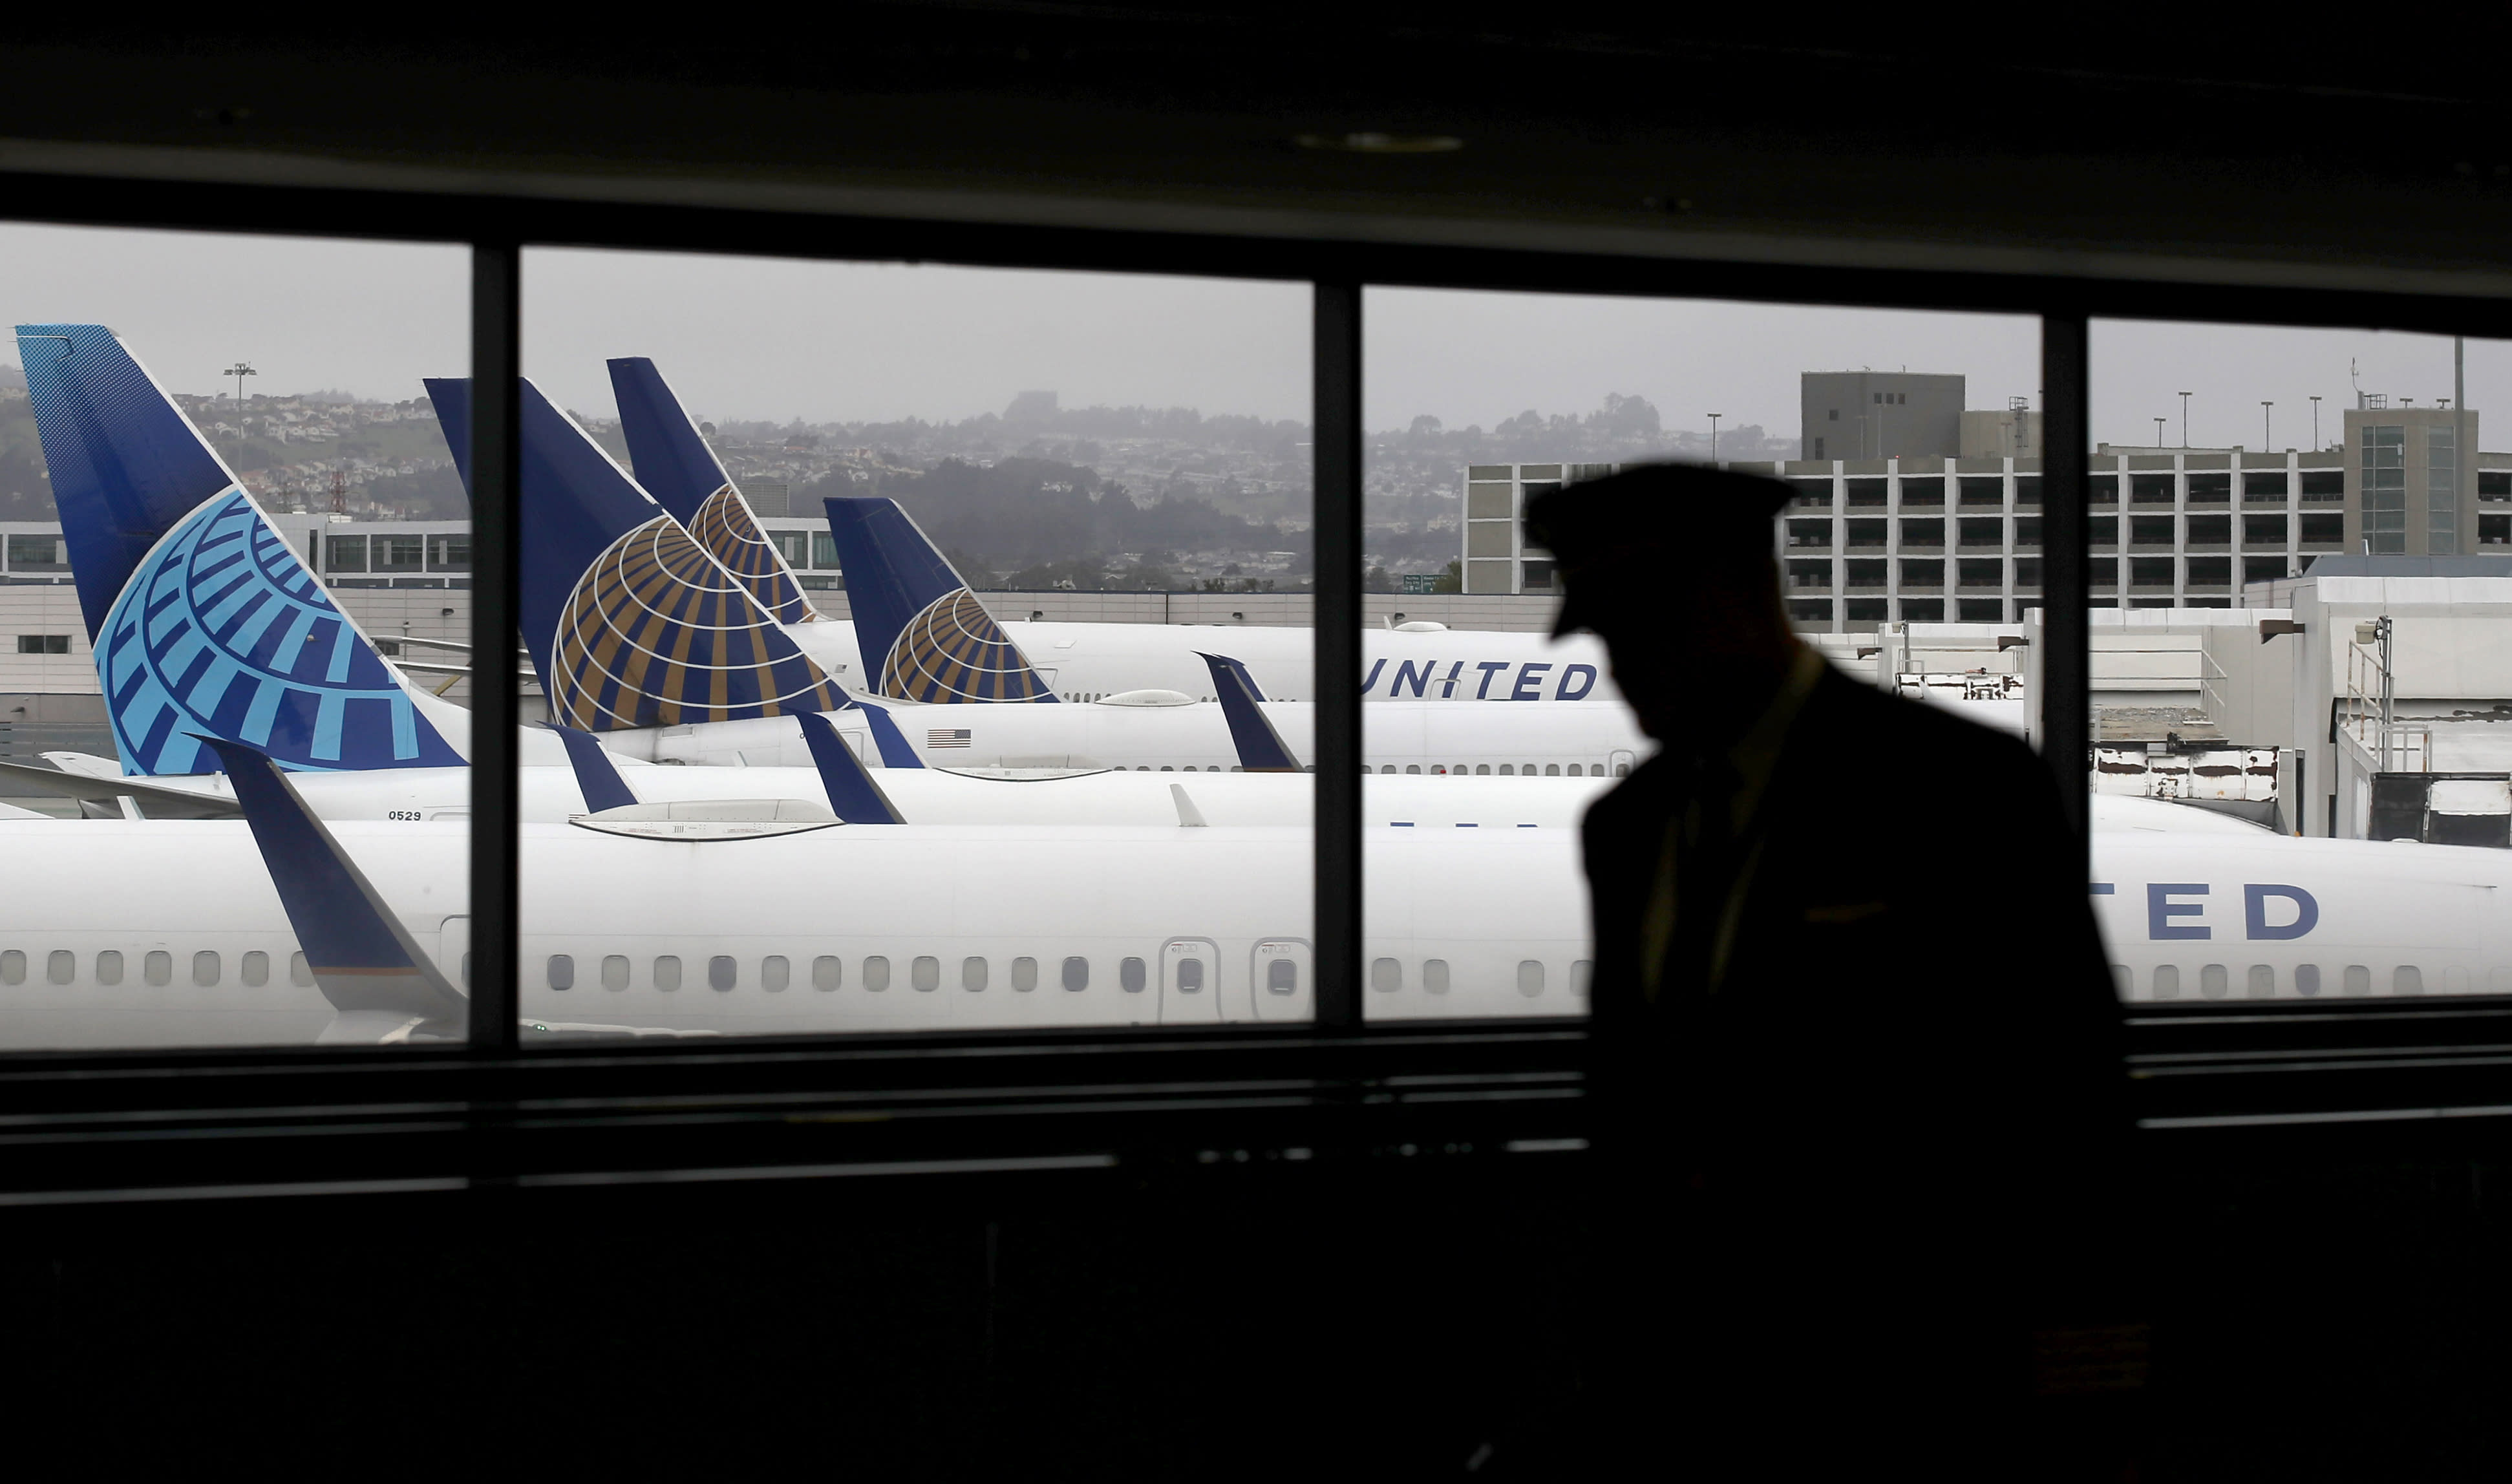 United Airlines opens flight school and plans to increase diversity